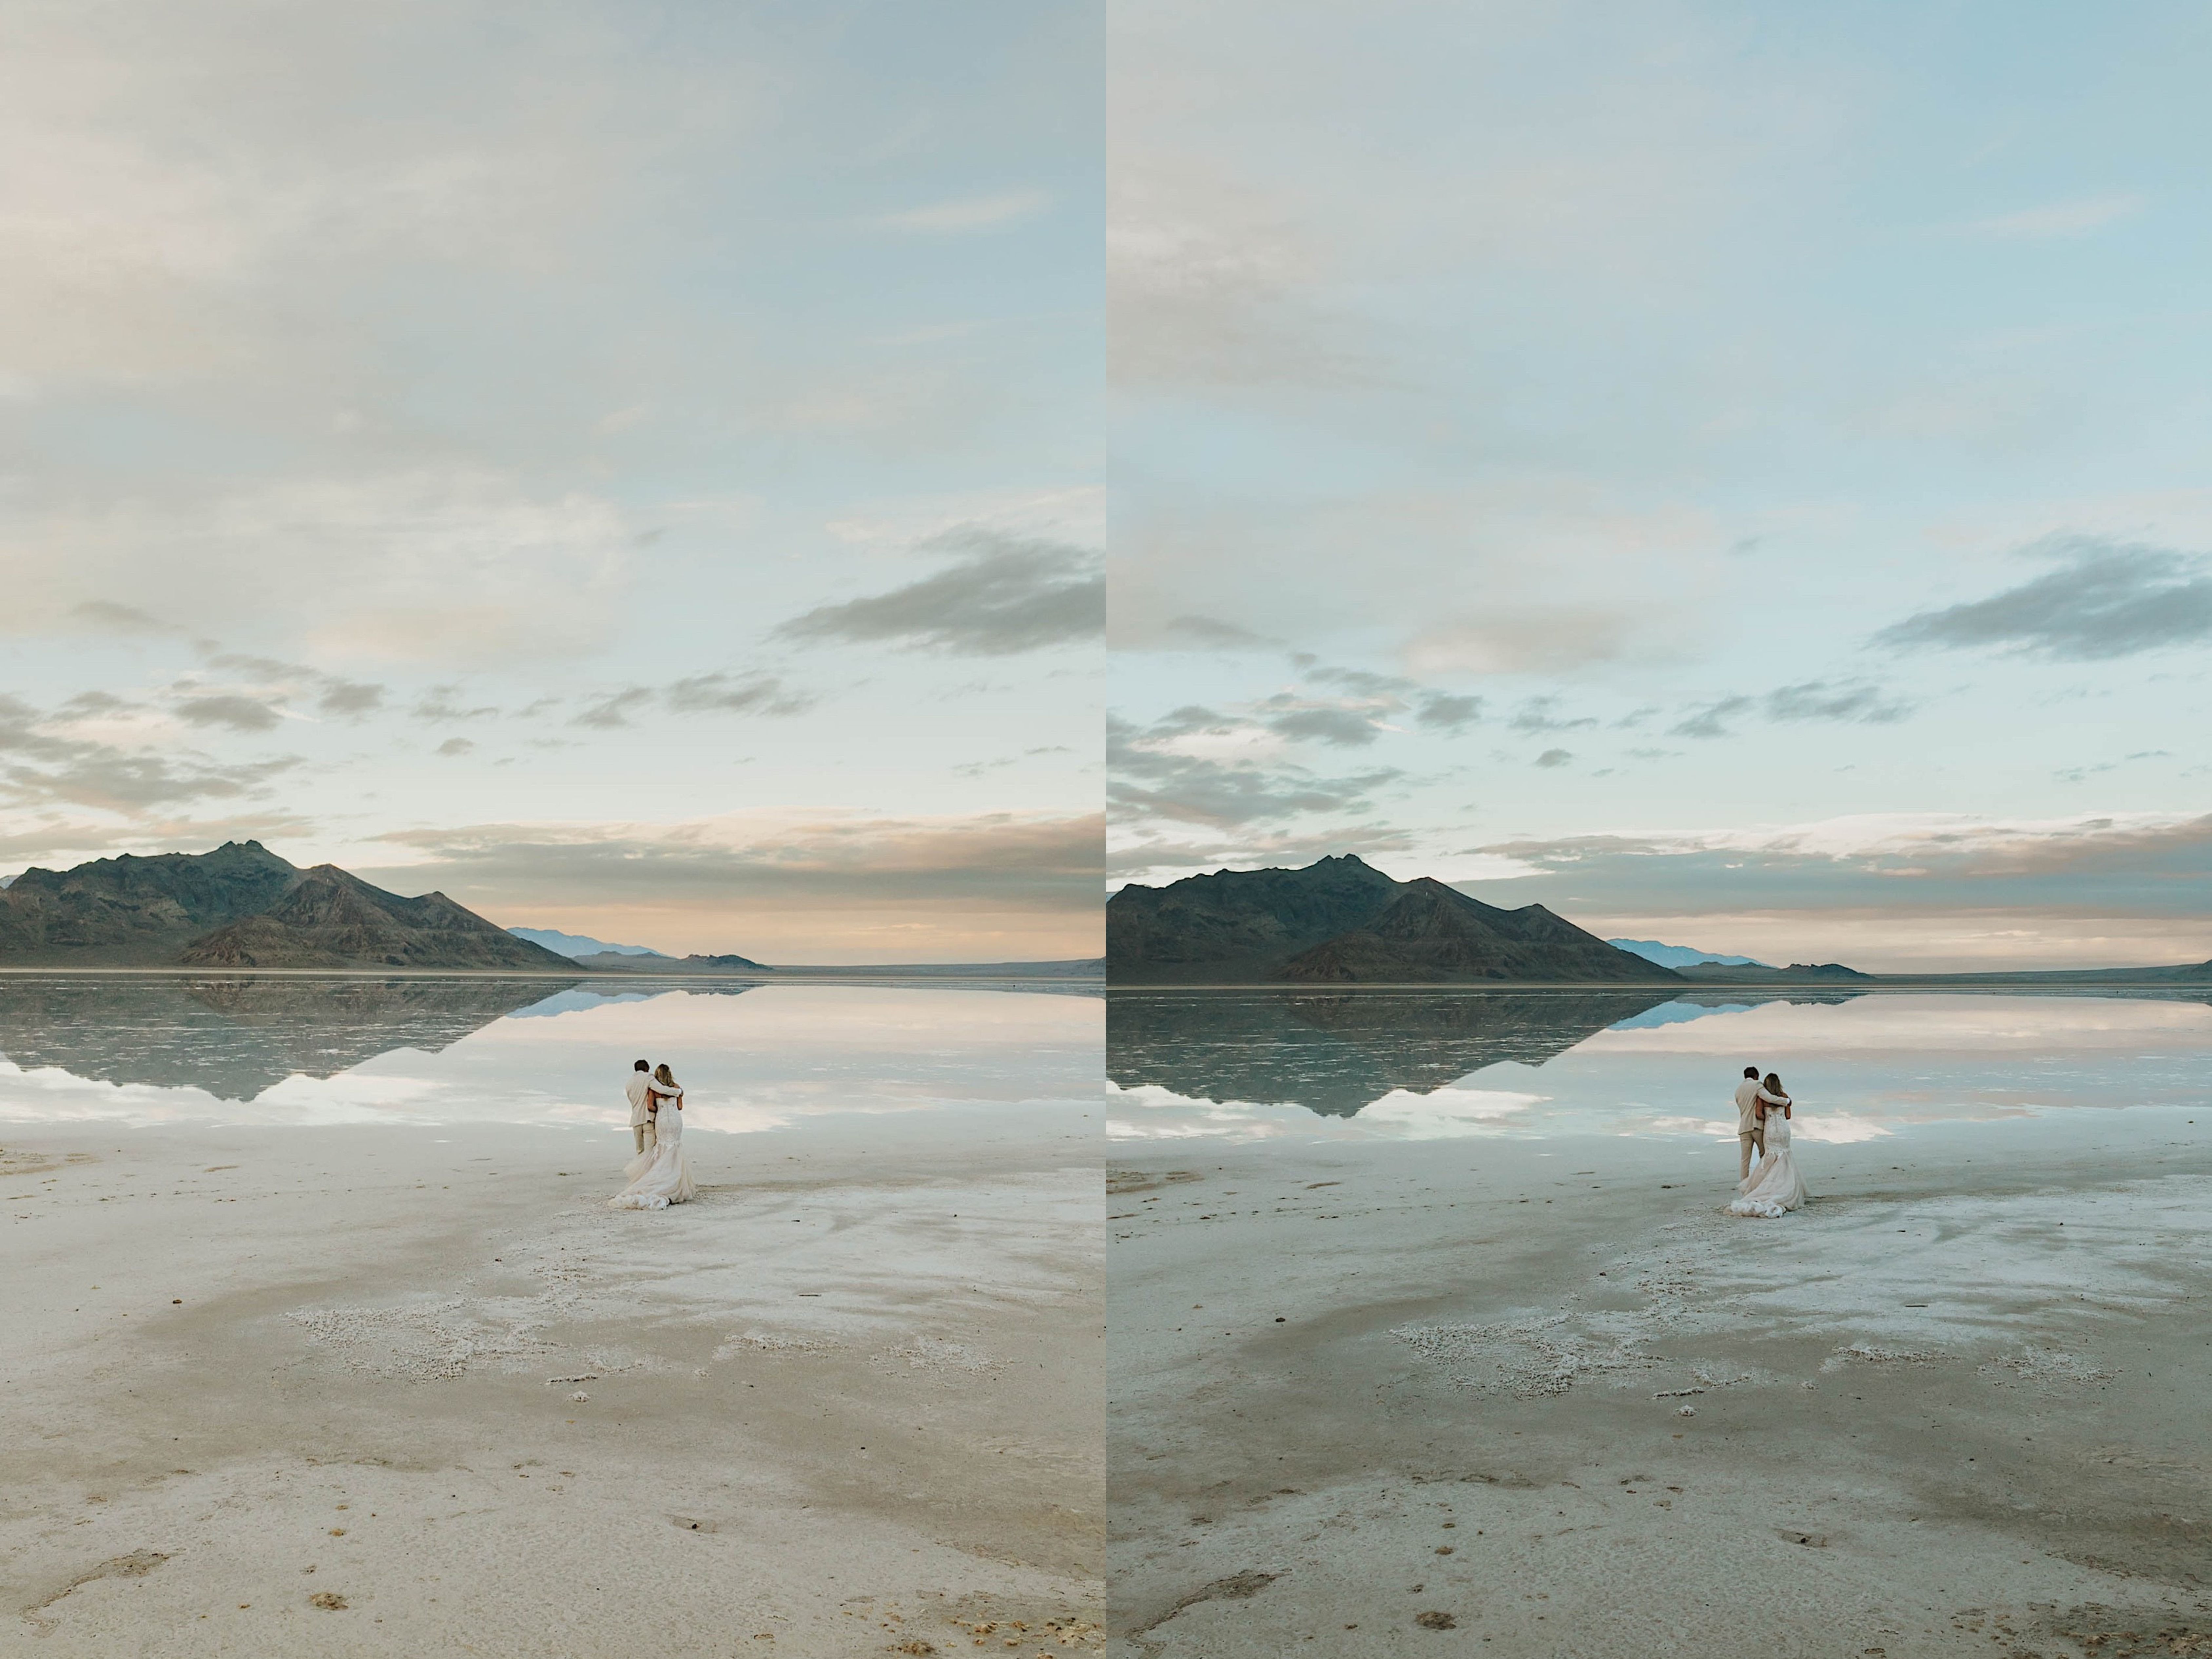 2 photos side by side of a bride and groom in the distance walking through the Utah Salt Flats together towards the mountains in the distance